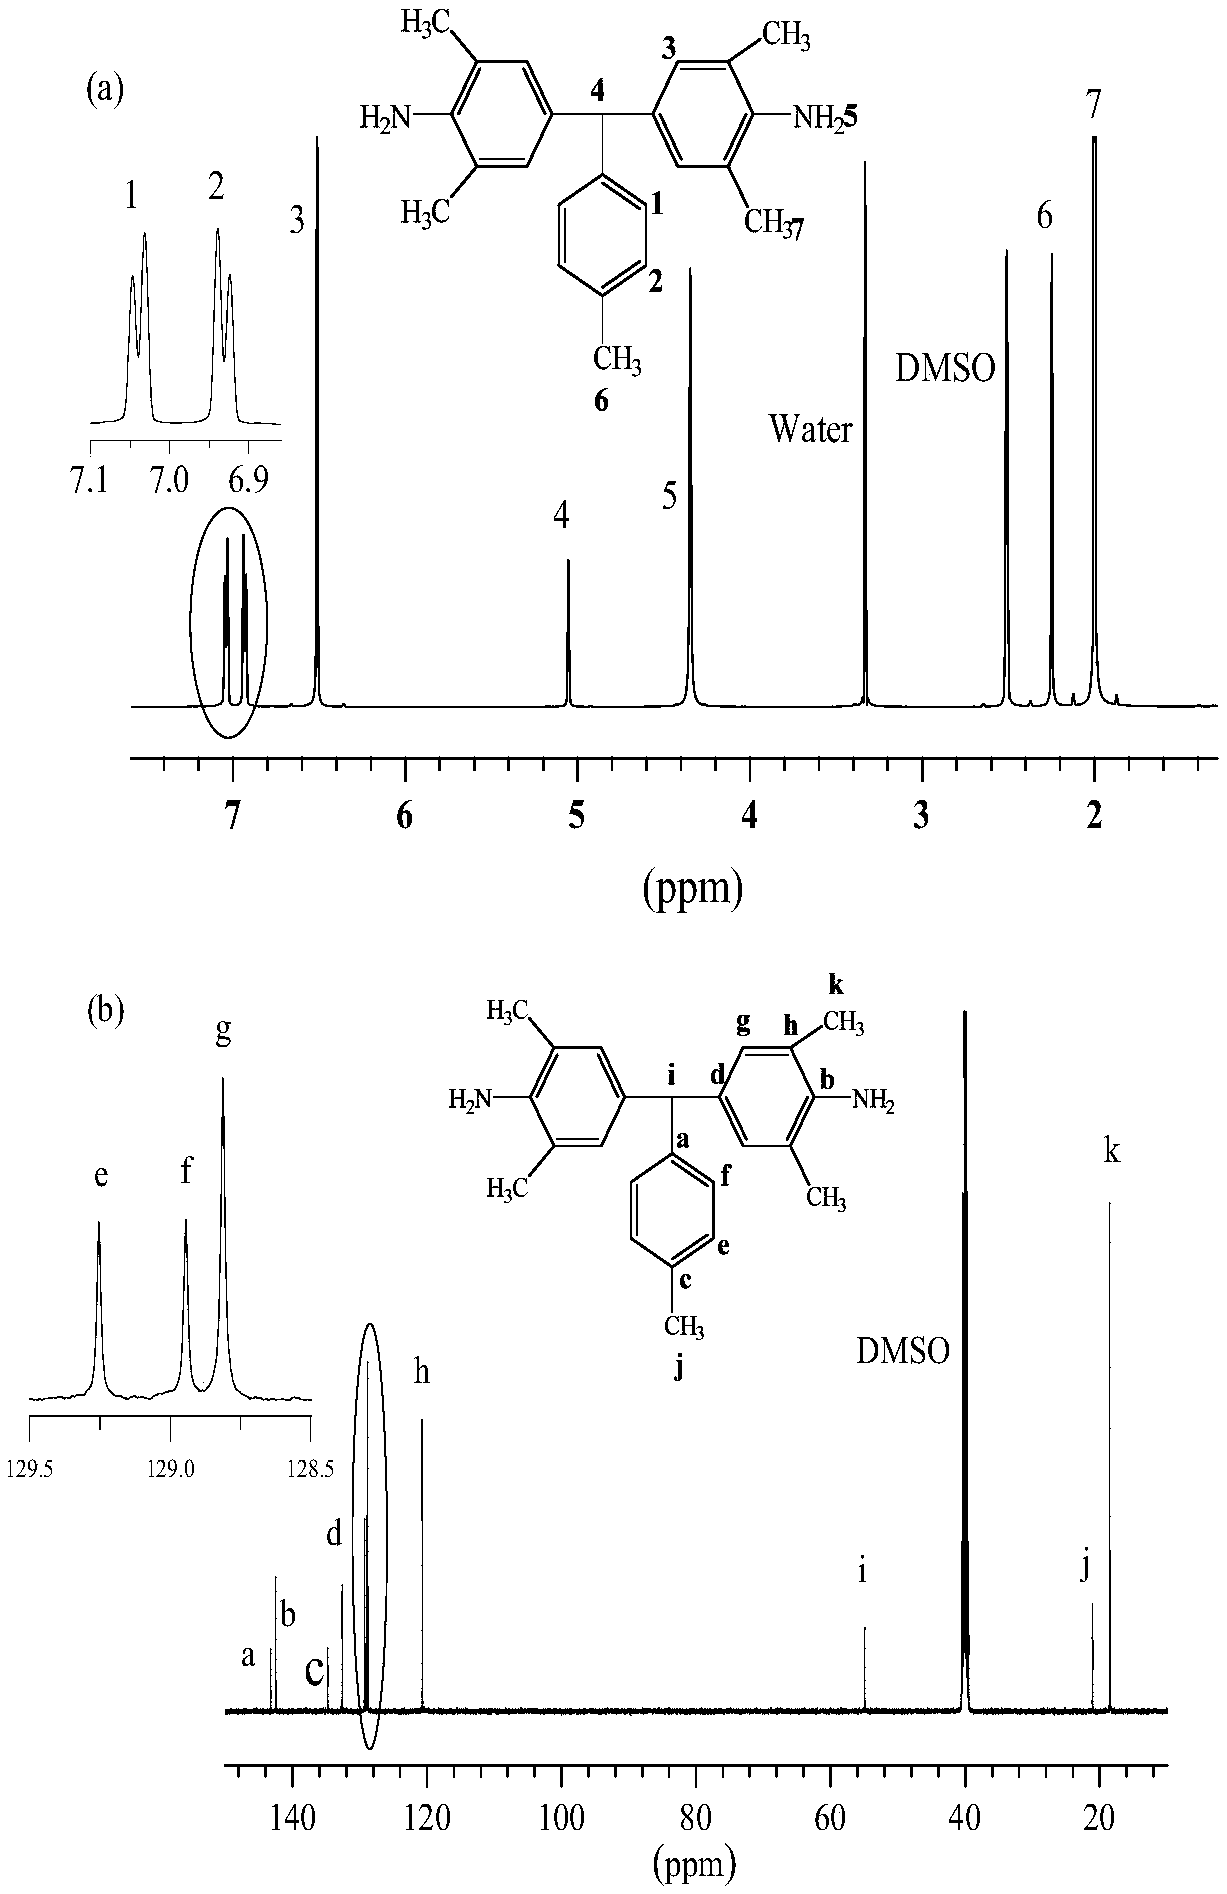 Aromatic diamine and polyimide containing tolyl and non-coplanar structure and their preparation methods